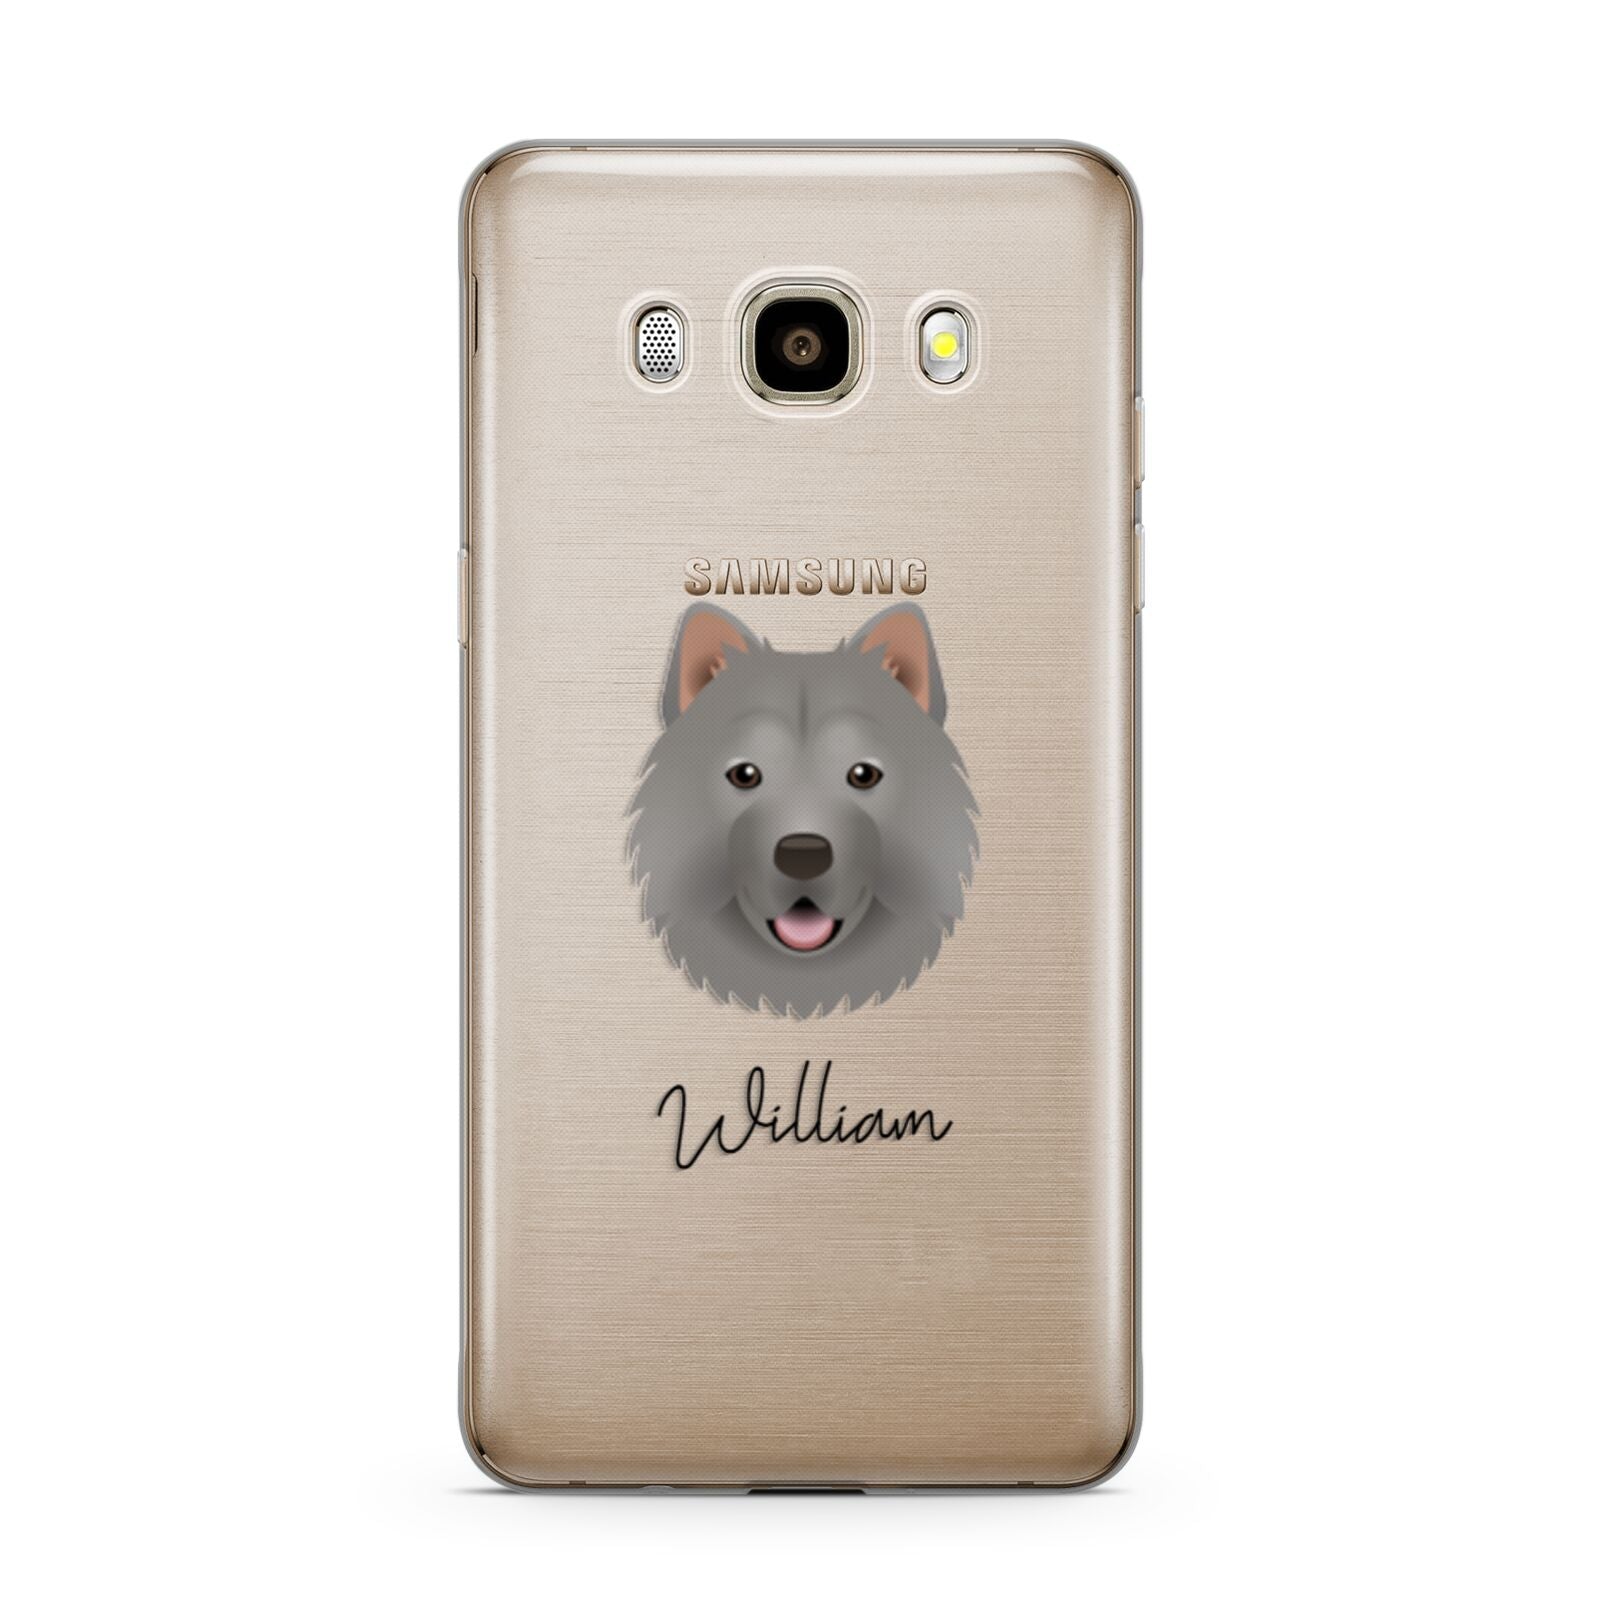 Chusky Personalised Samsung Galaxy J7 2016 Case on gold phone